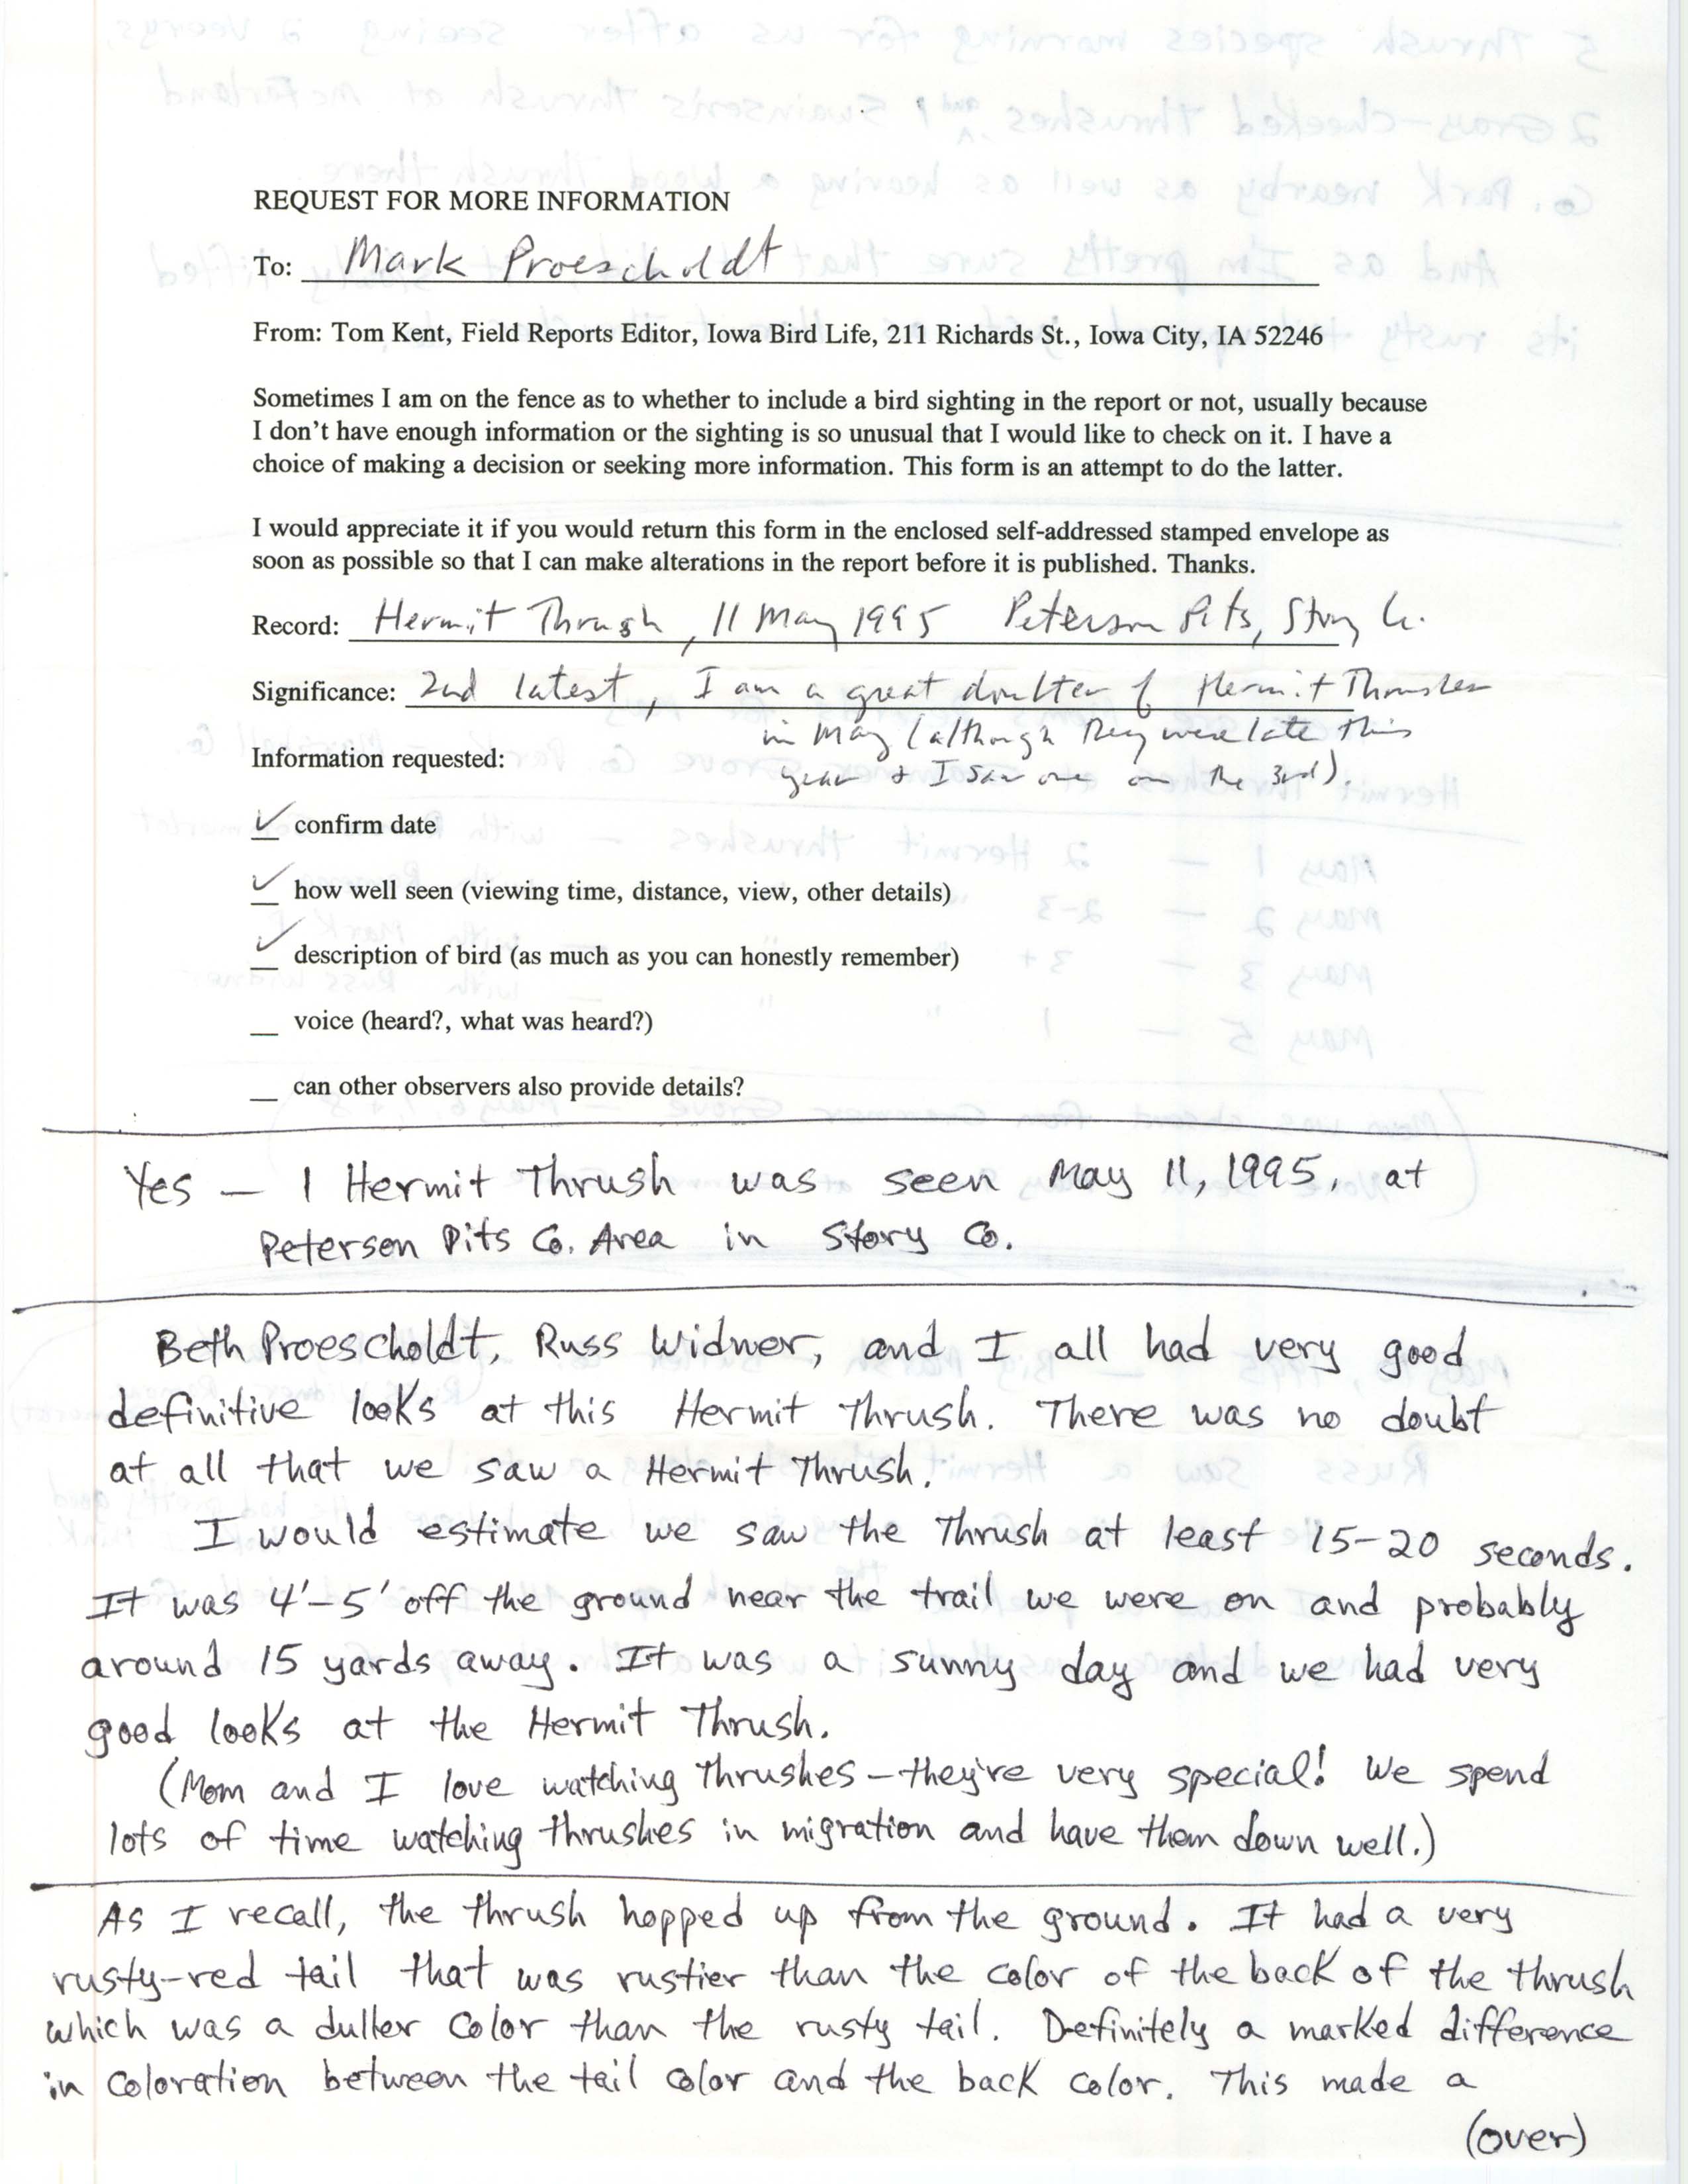 Rare bird documentation form for Hermit Thrush at Peterson Pits Recreation Area, 1995